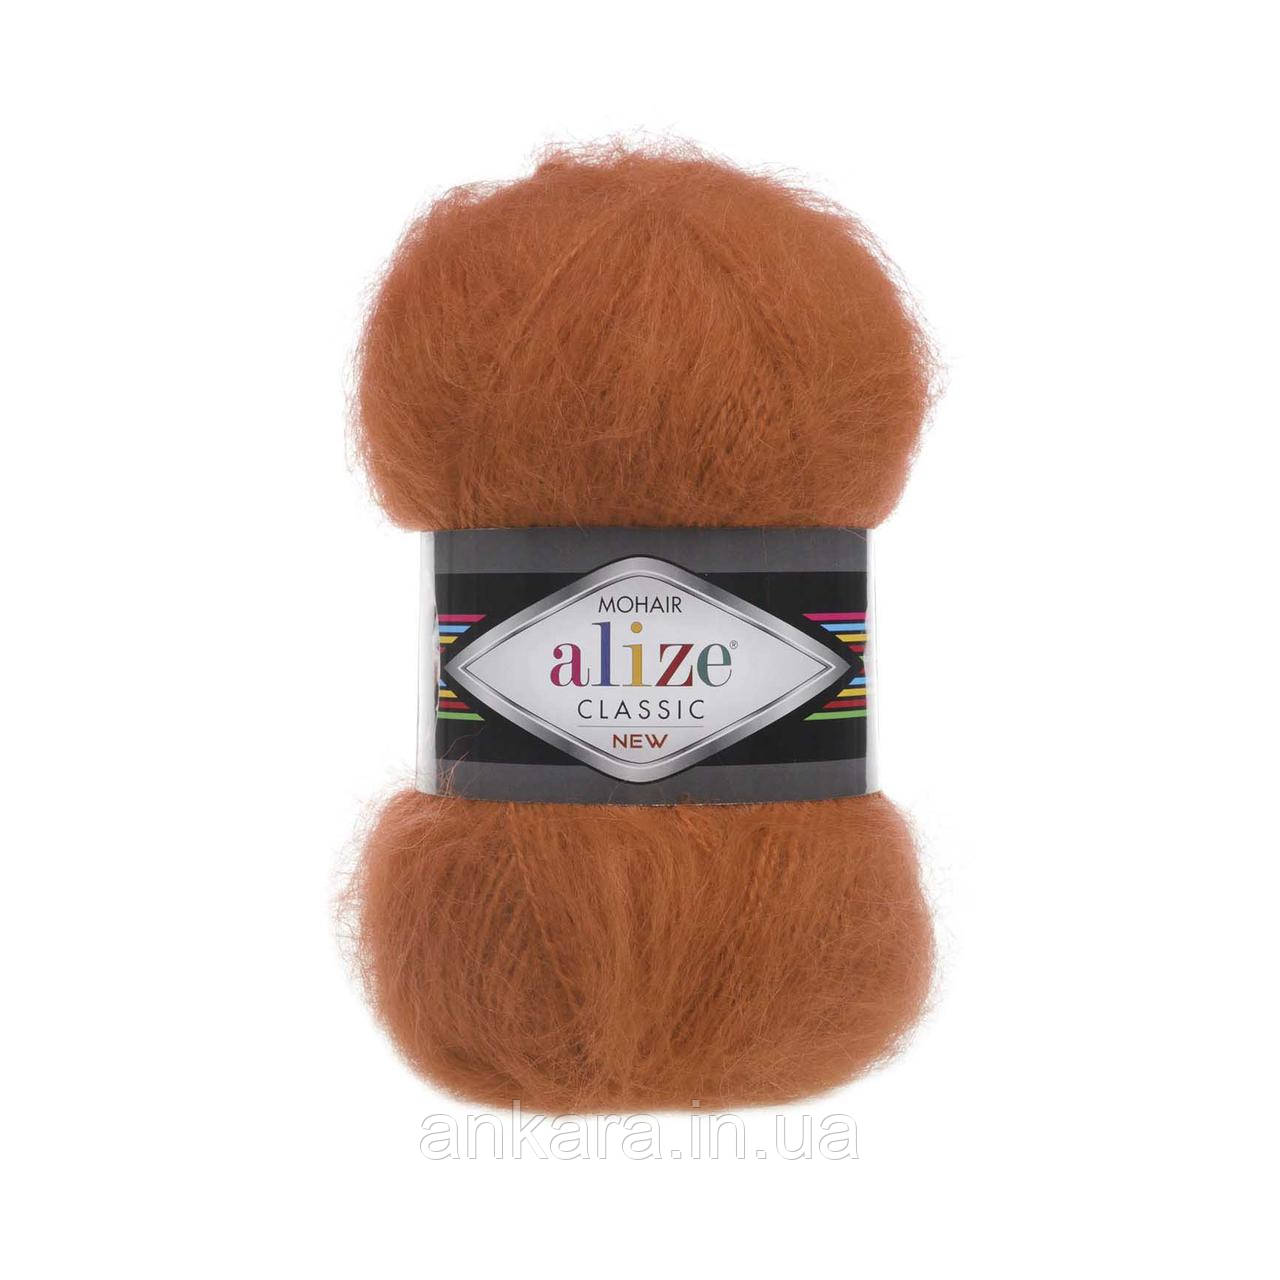 Alize Mohair Classic 36